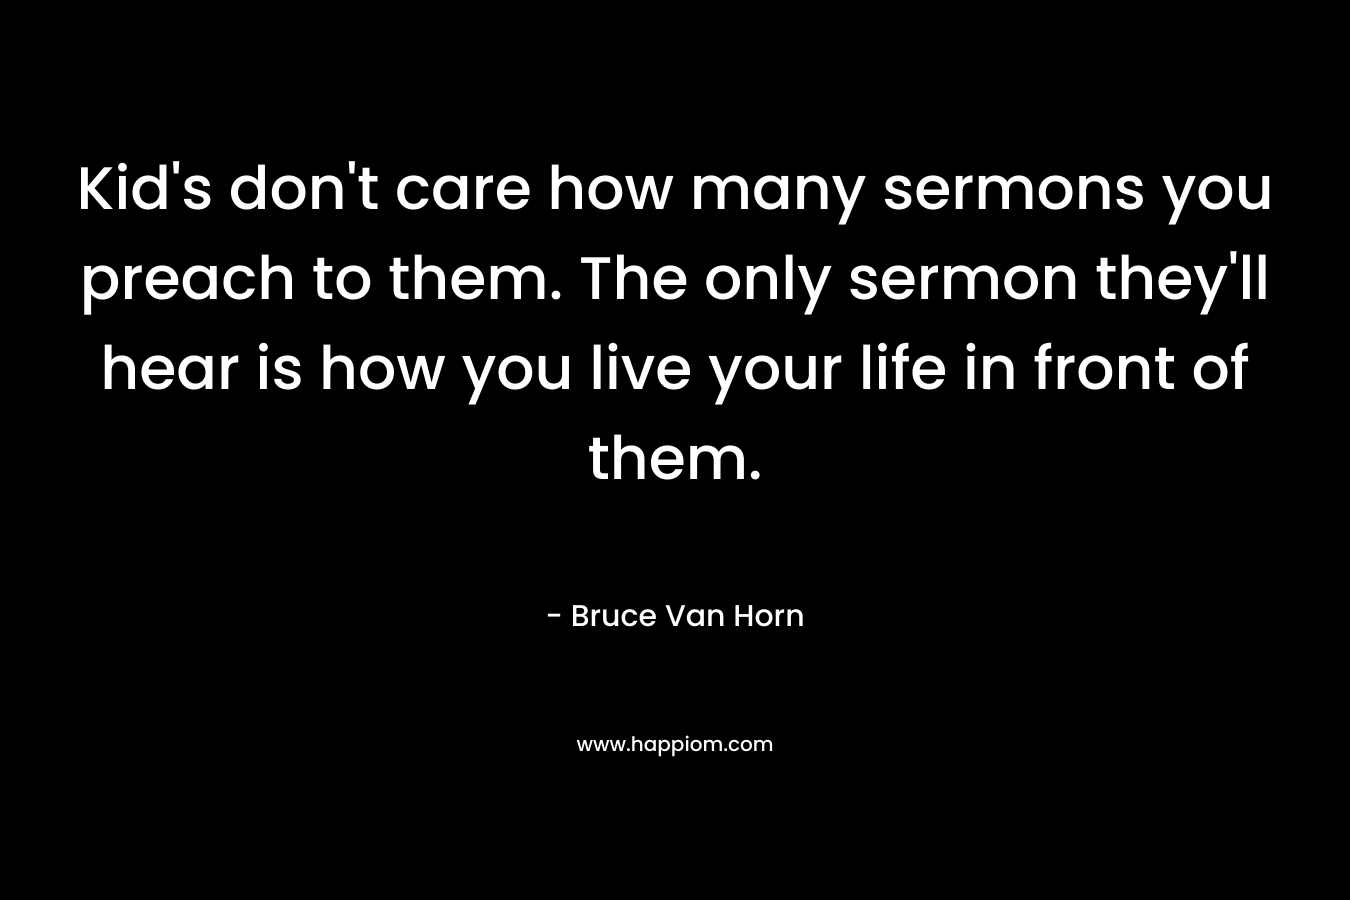 Kid's don't care how many sermons you preach to them. The only sermon they'll hear is how you live your life in front of them.